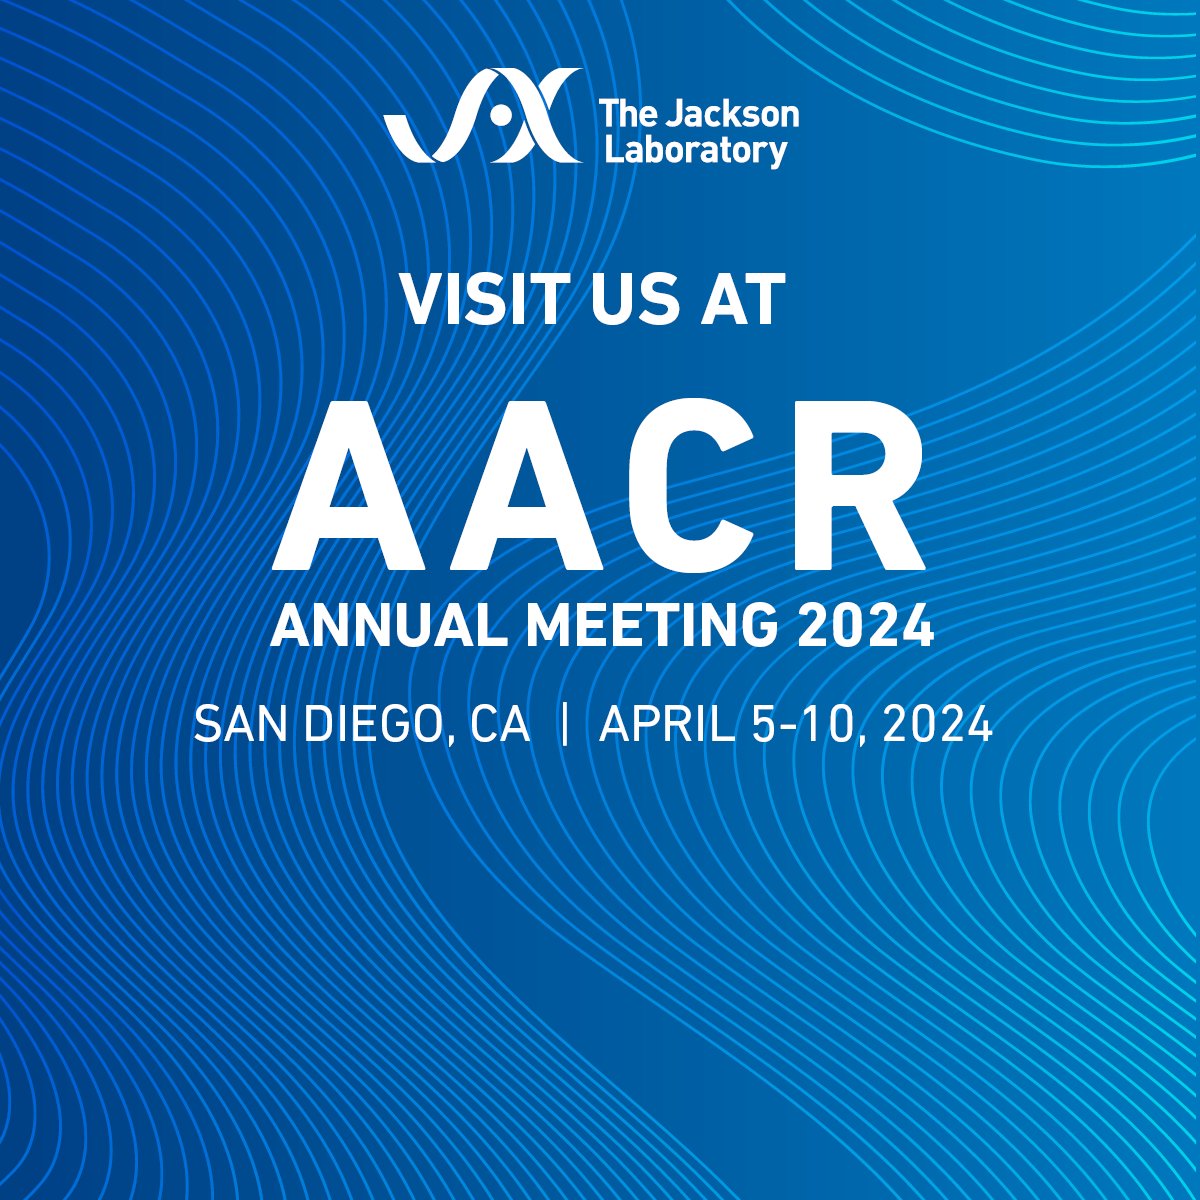 👋 We're excited to be at #AACR24! ➡️ Visit us at Booth 3017 to chat about upcoming @jacksonlab courses and workshops, as well as #Postbac, #PhD and #Postdoc opportunities. ➡️ Don't forget to check out the fantastic research current JAX trainees are presenting at @AACR, too!